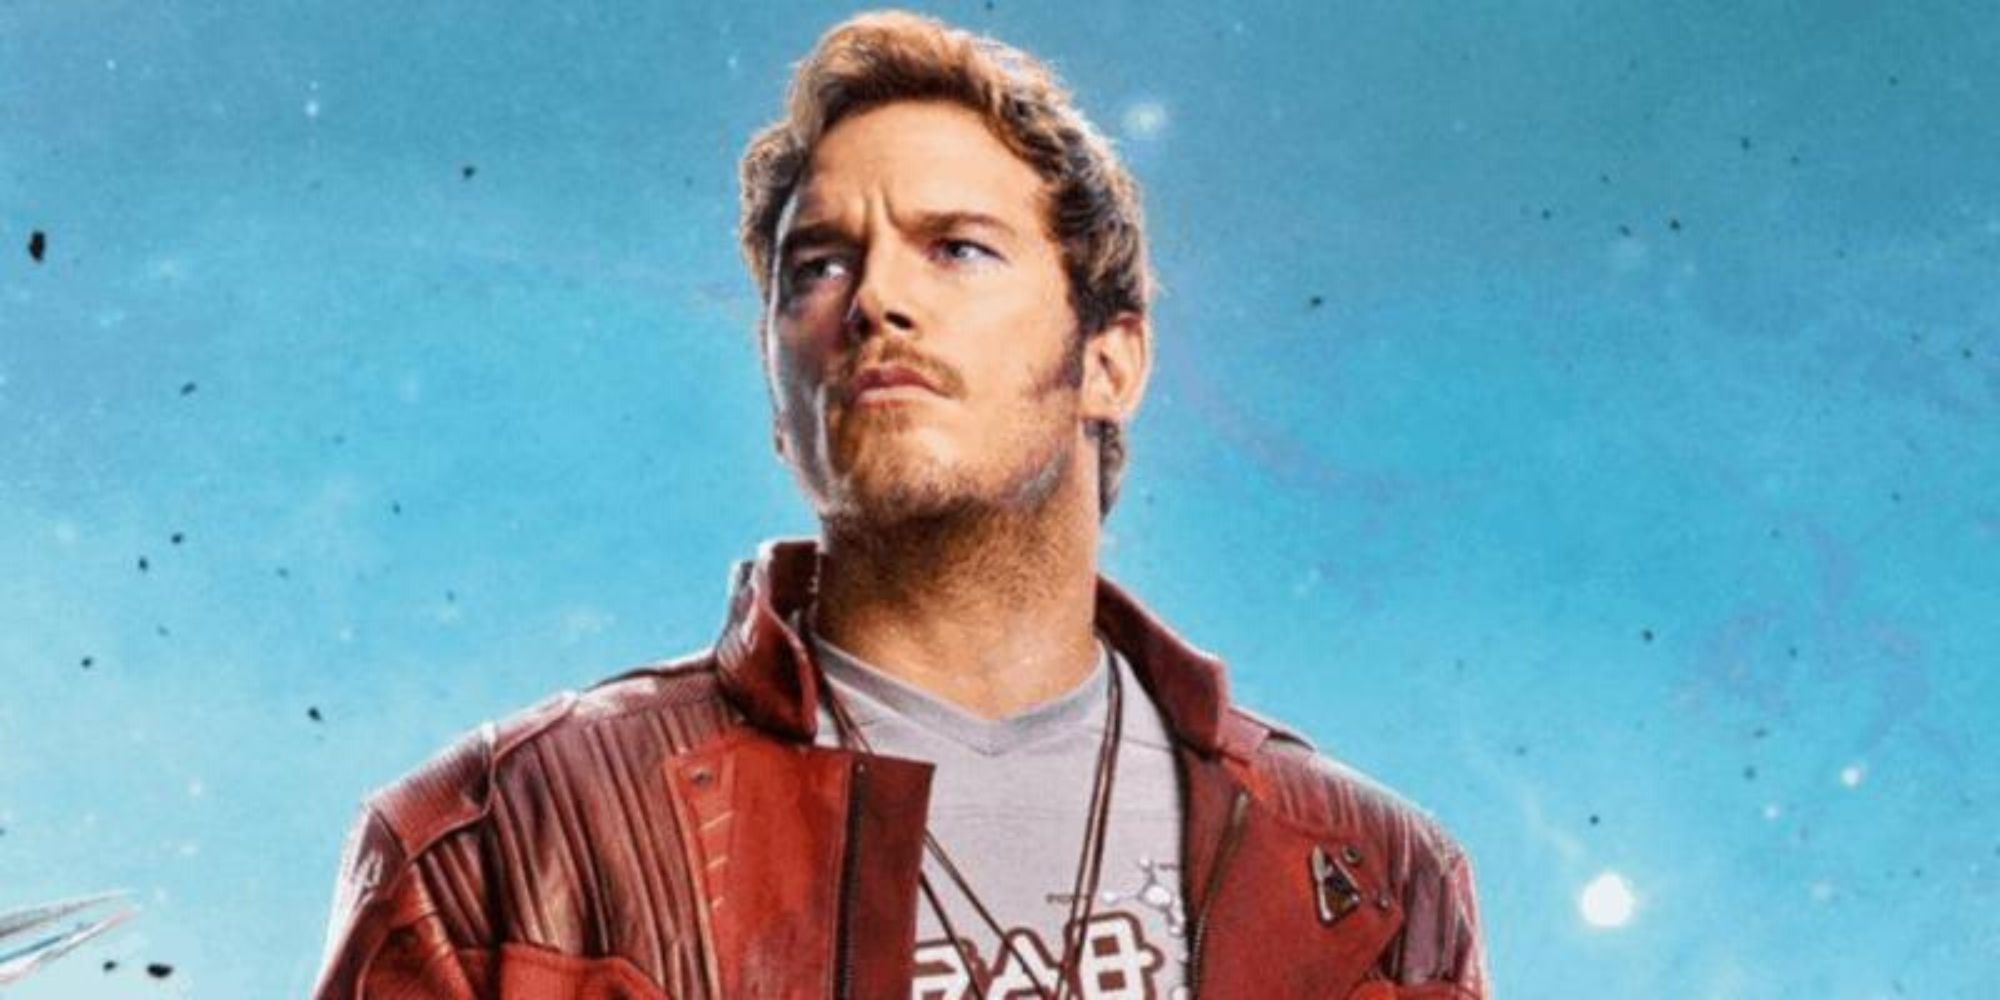 Star-Lord in Guardians of the Galaxy